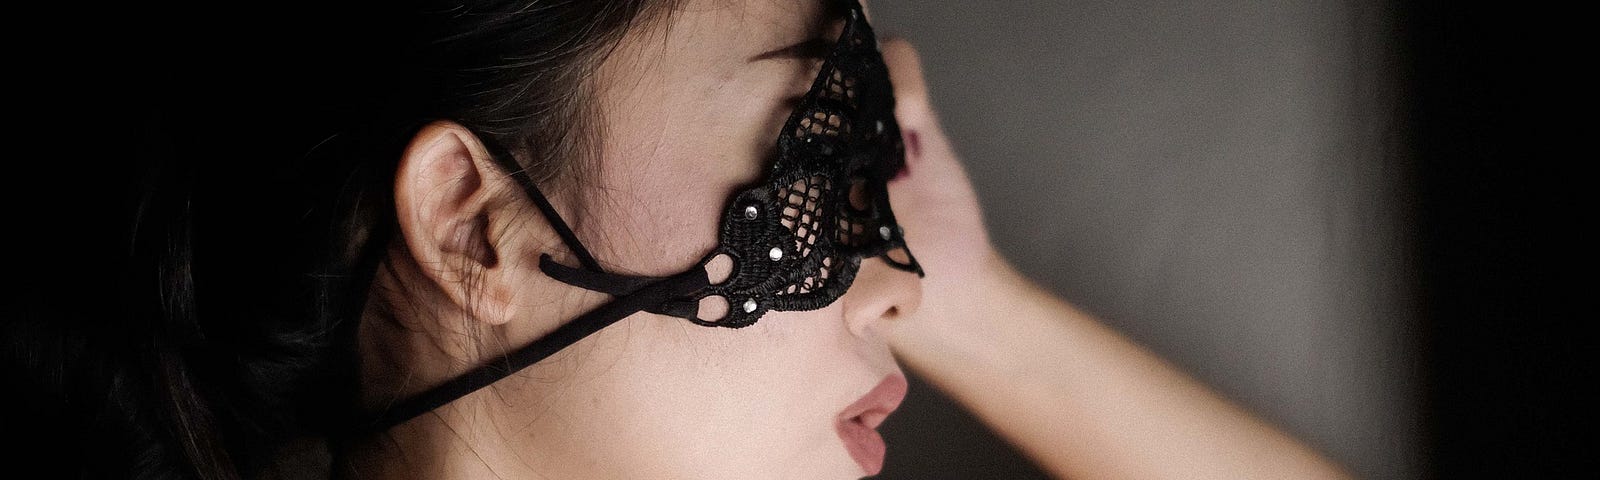 Image of woman, brunette hair, red shoulder straps, wears black masquerade mask, pouting lips